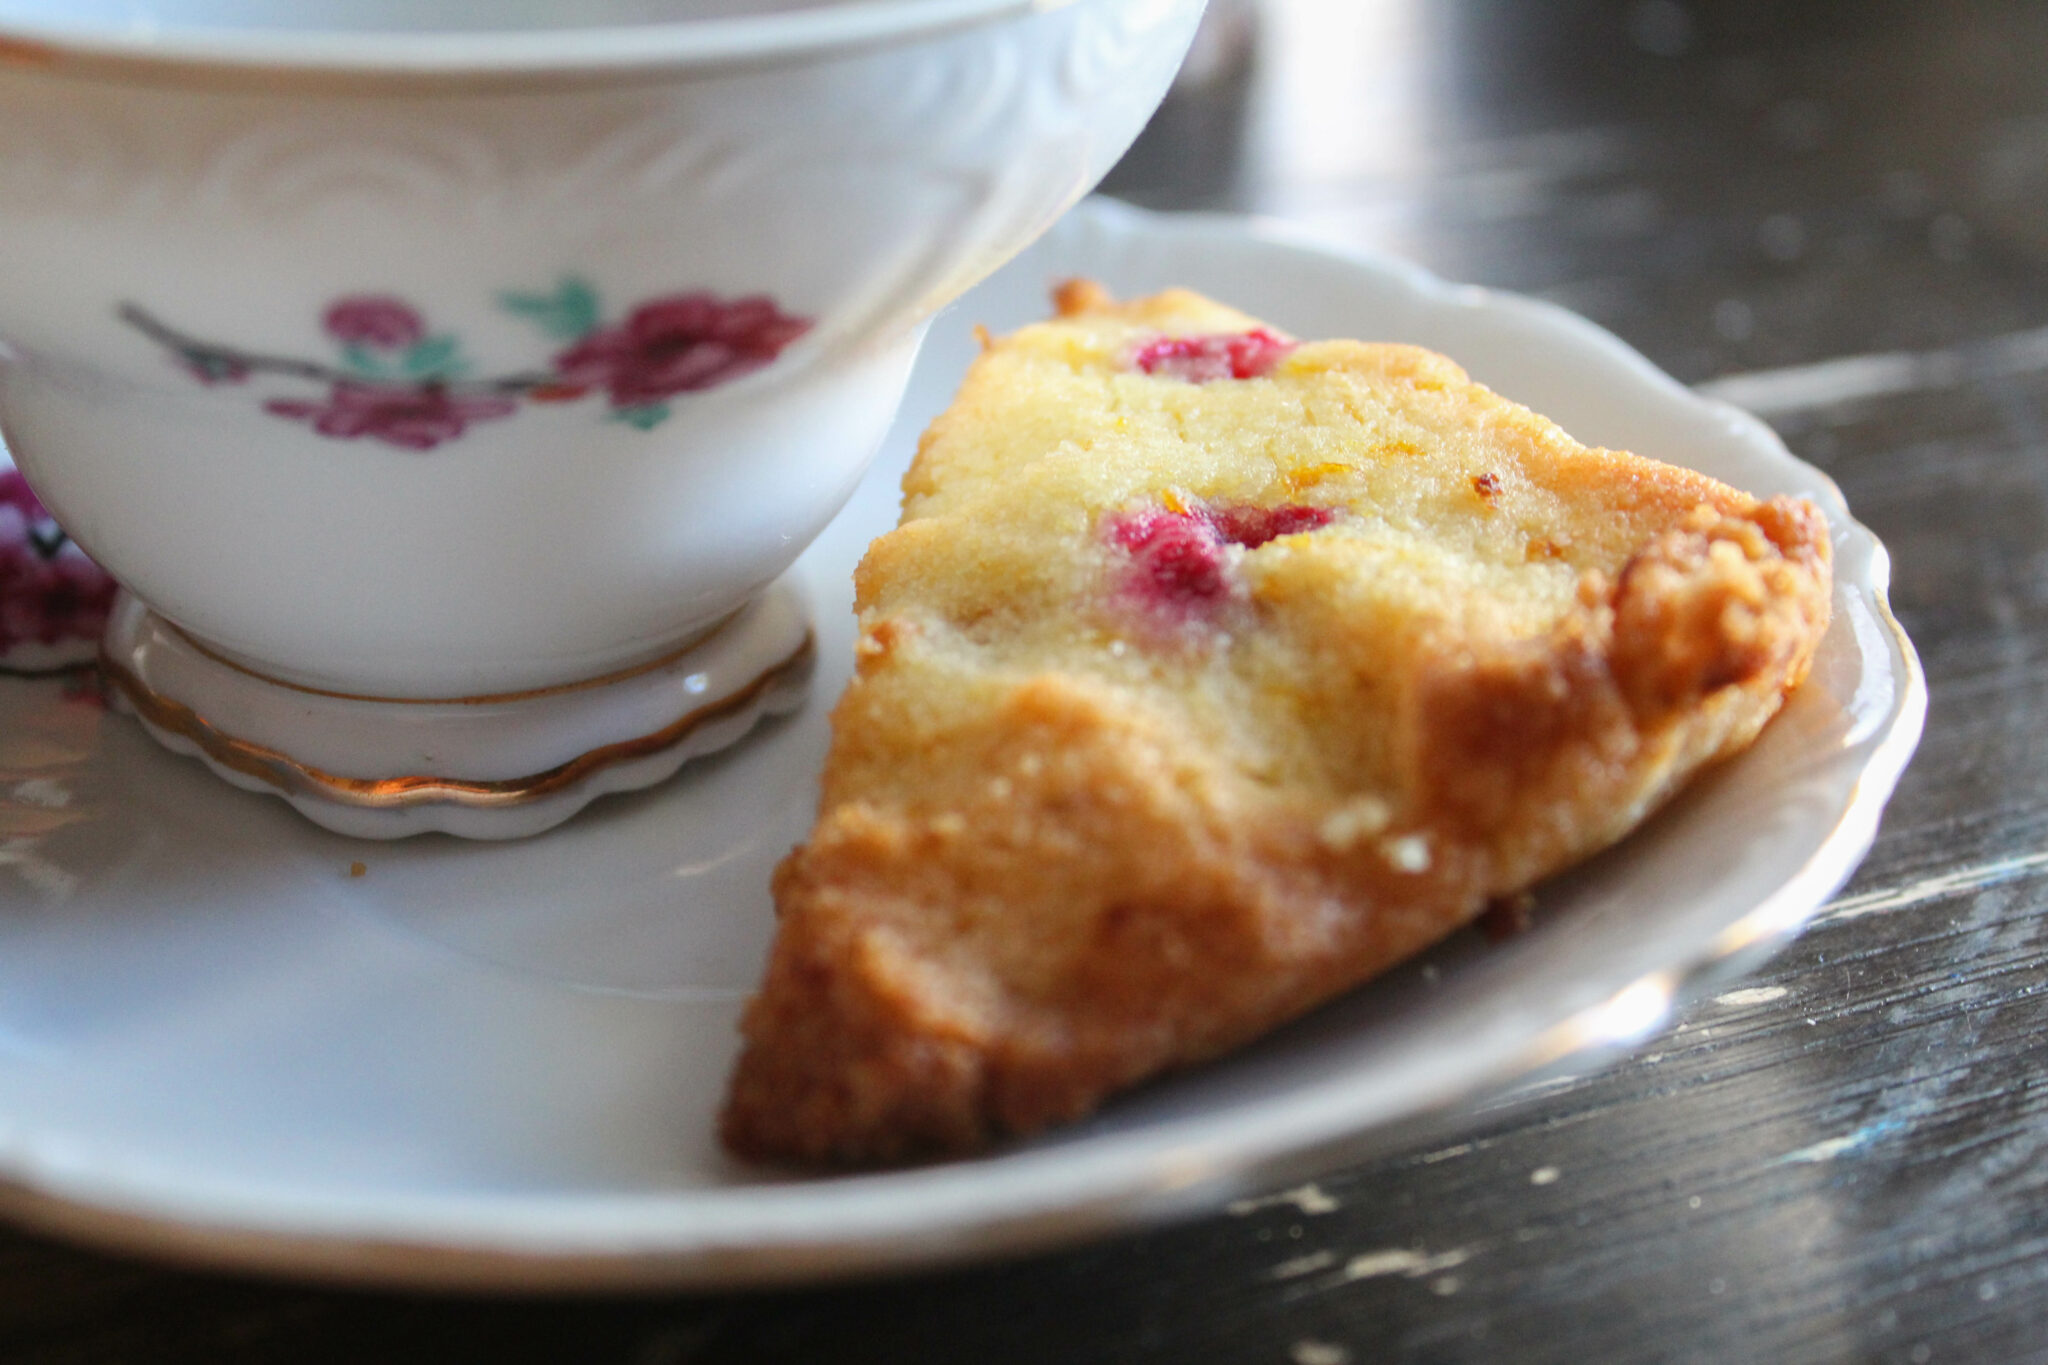 These Cranberry Orange Scones are the perfect way to bring the coffee shop to you! They're low-carb, keto, and Trim Healthy Mama S.